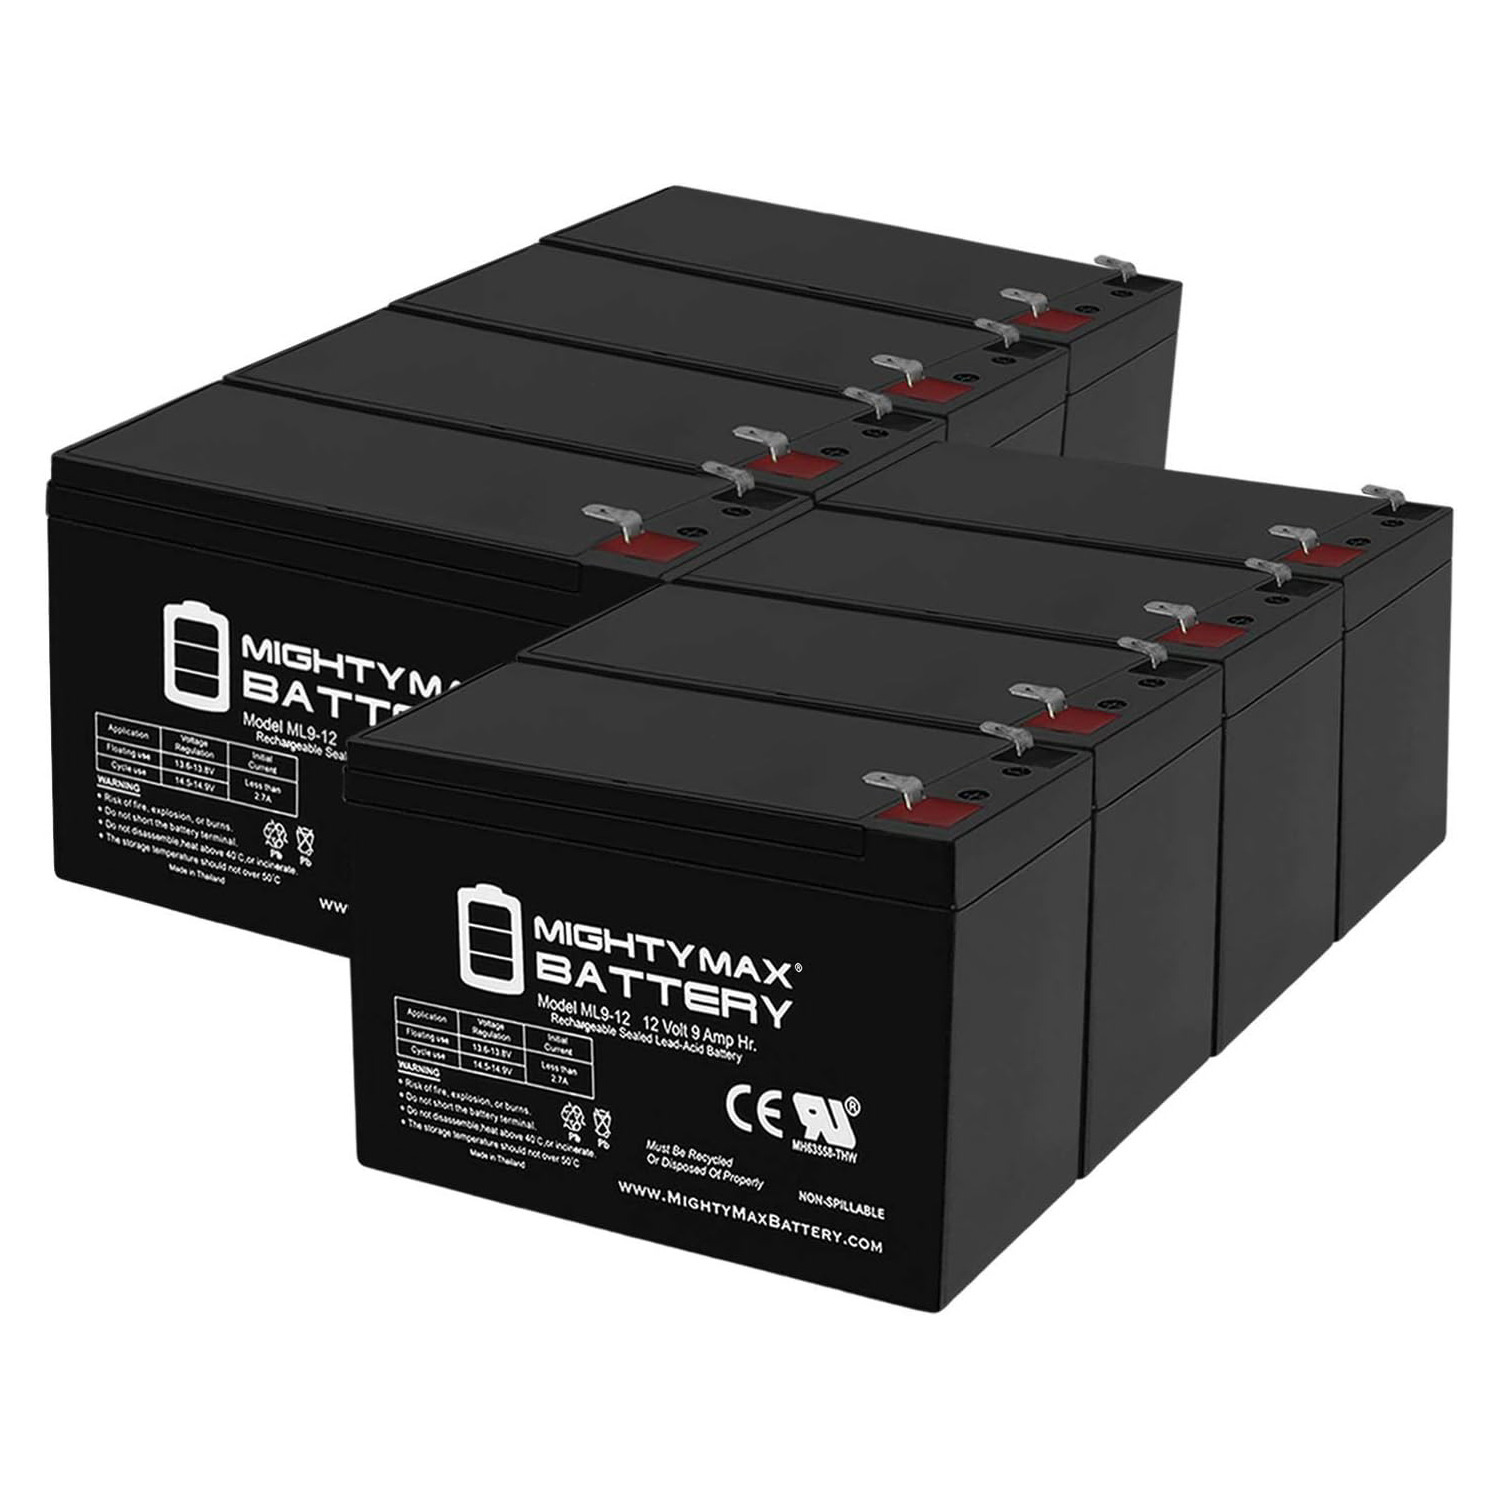 Altronix SMP7PMCTXPD4CB 12V, 9Ah Lead Acid Battery - 8 Pack